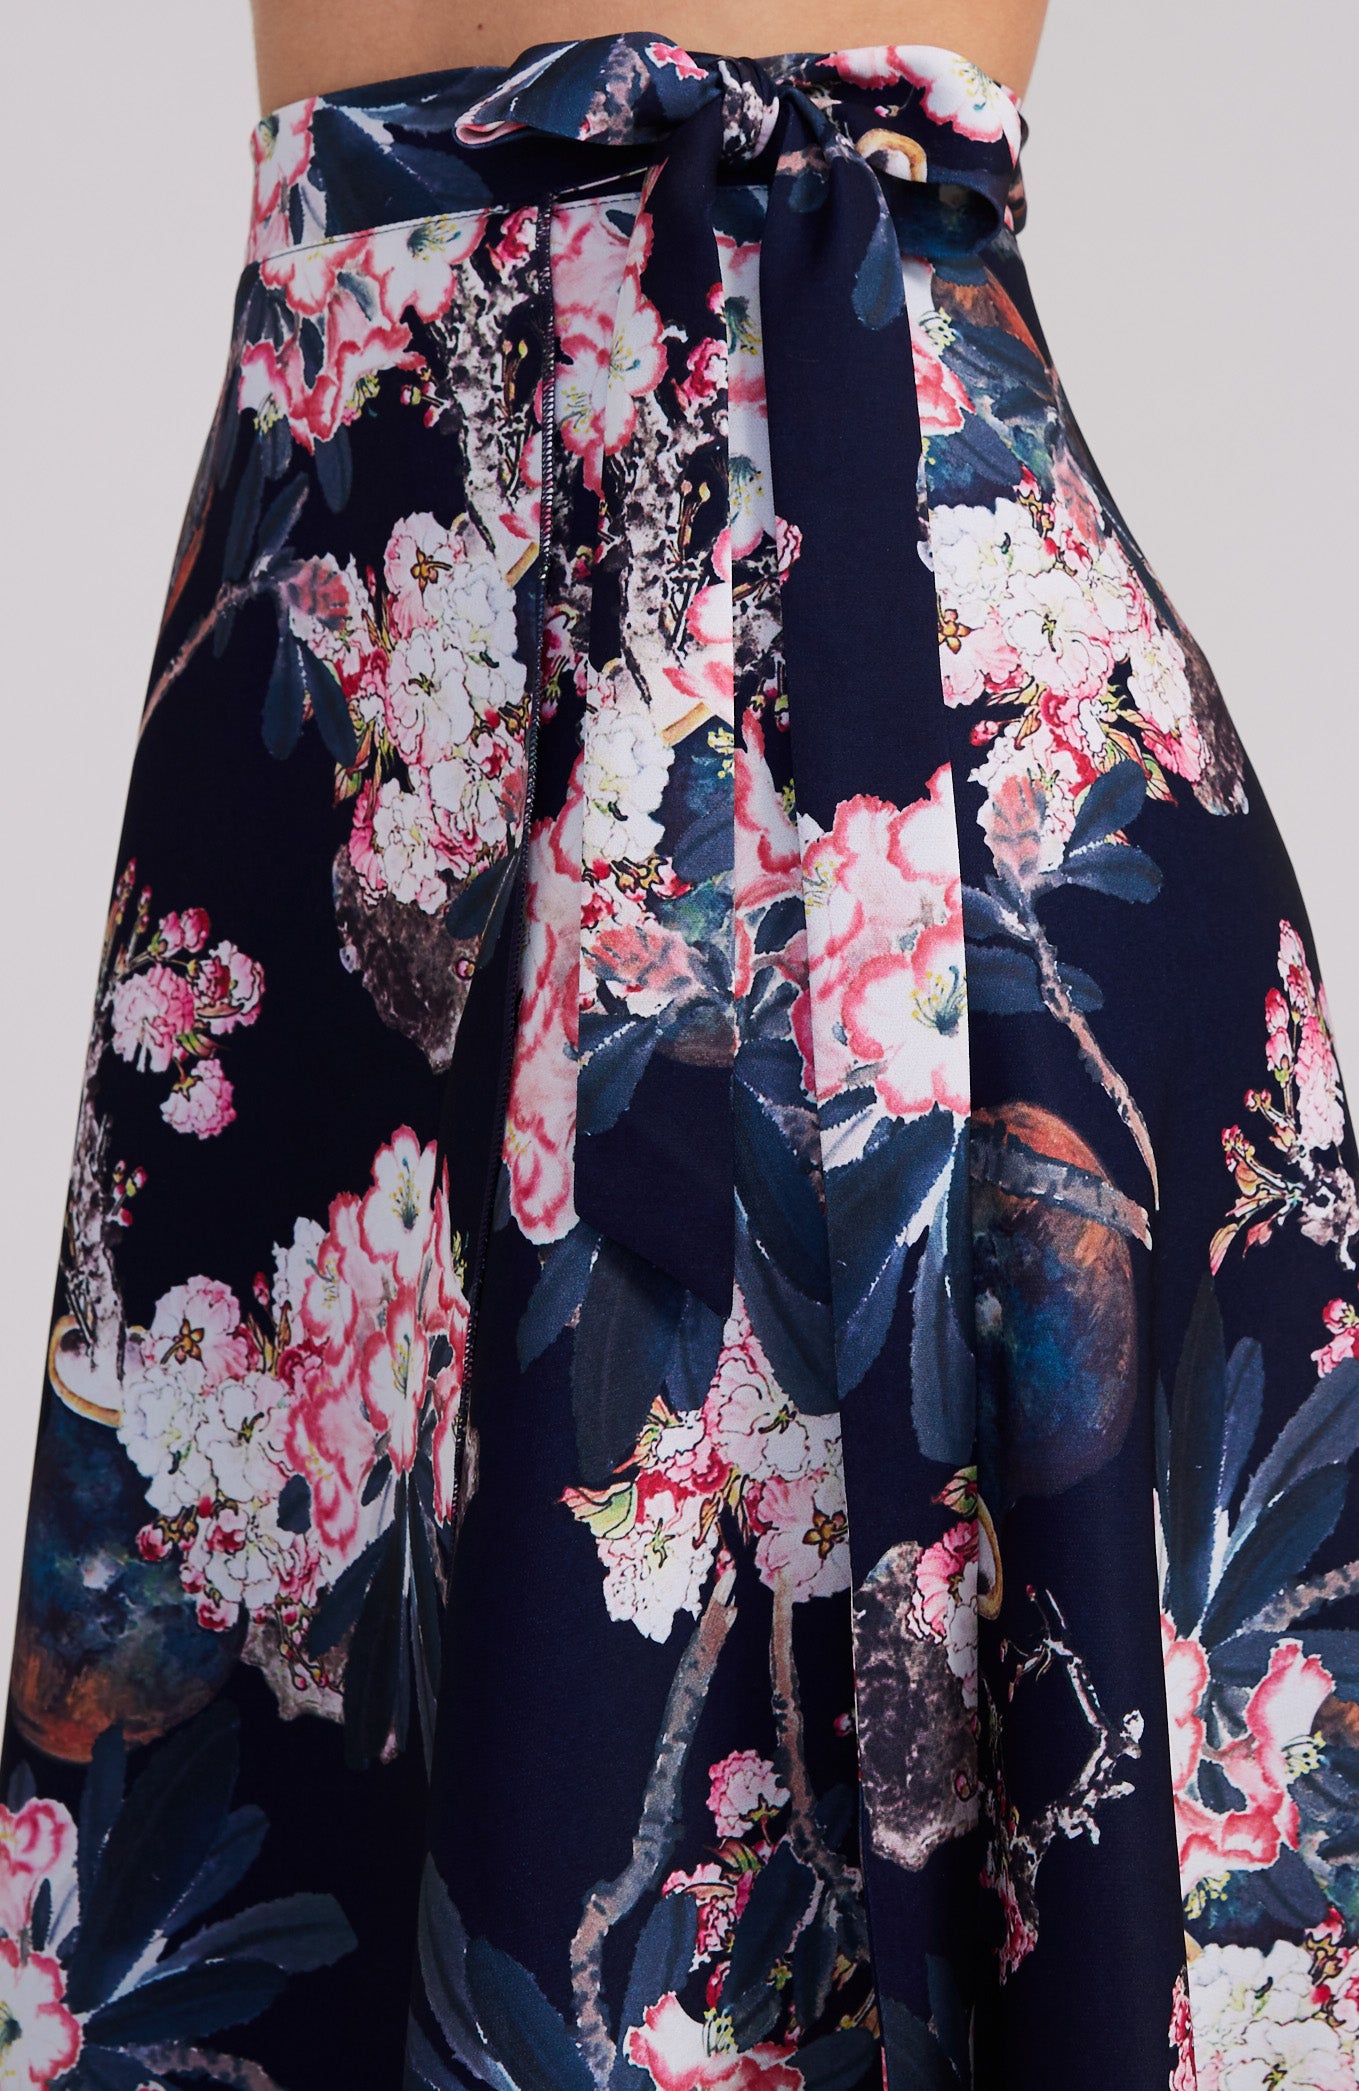 wrap skirt in pink florals on navy blue